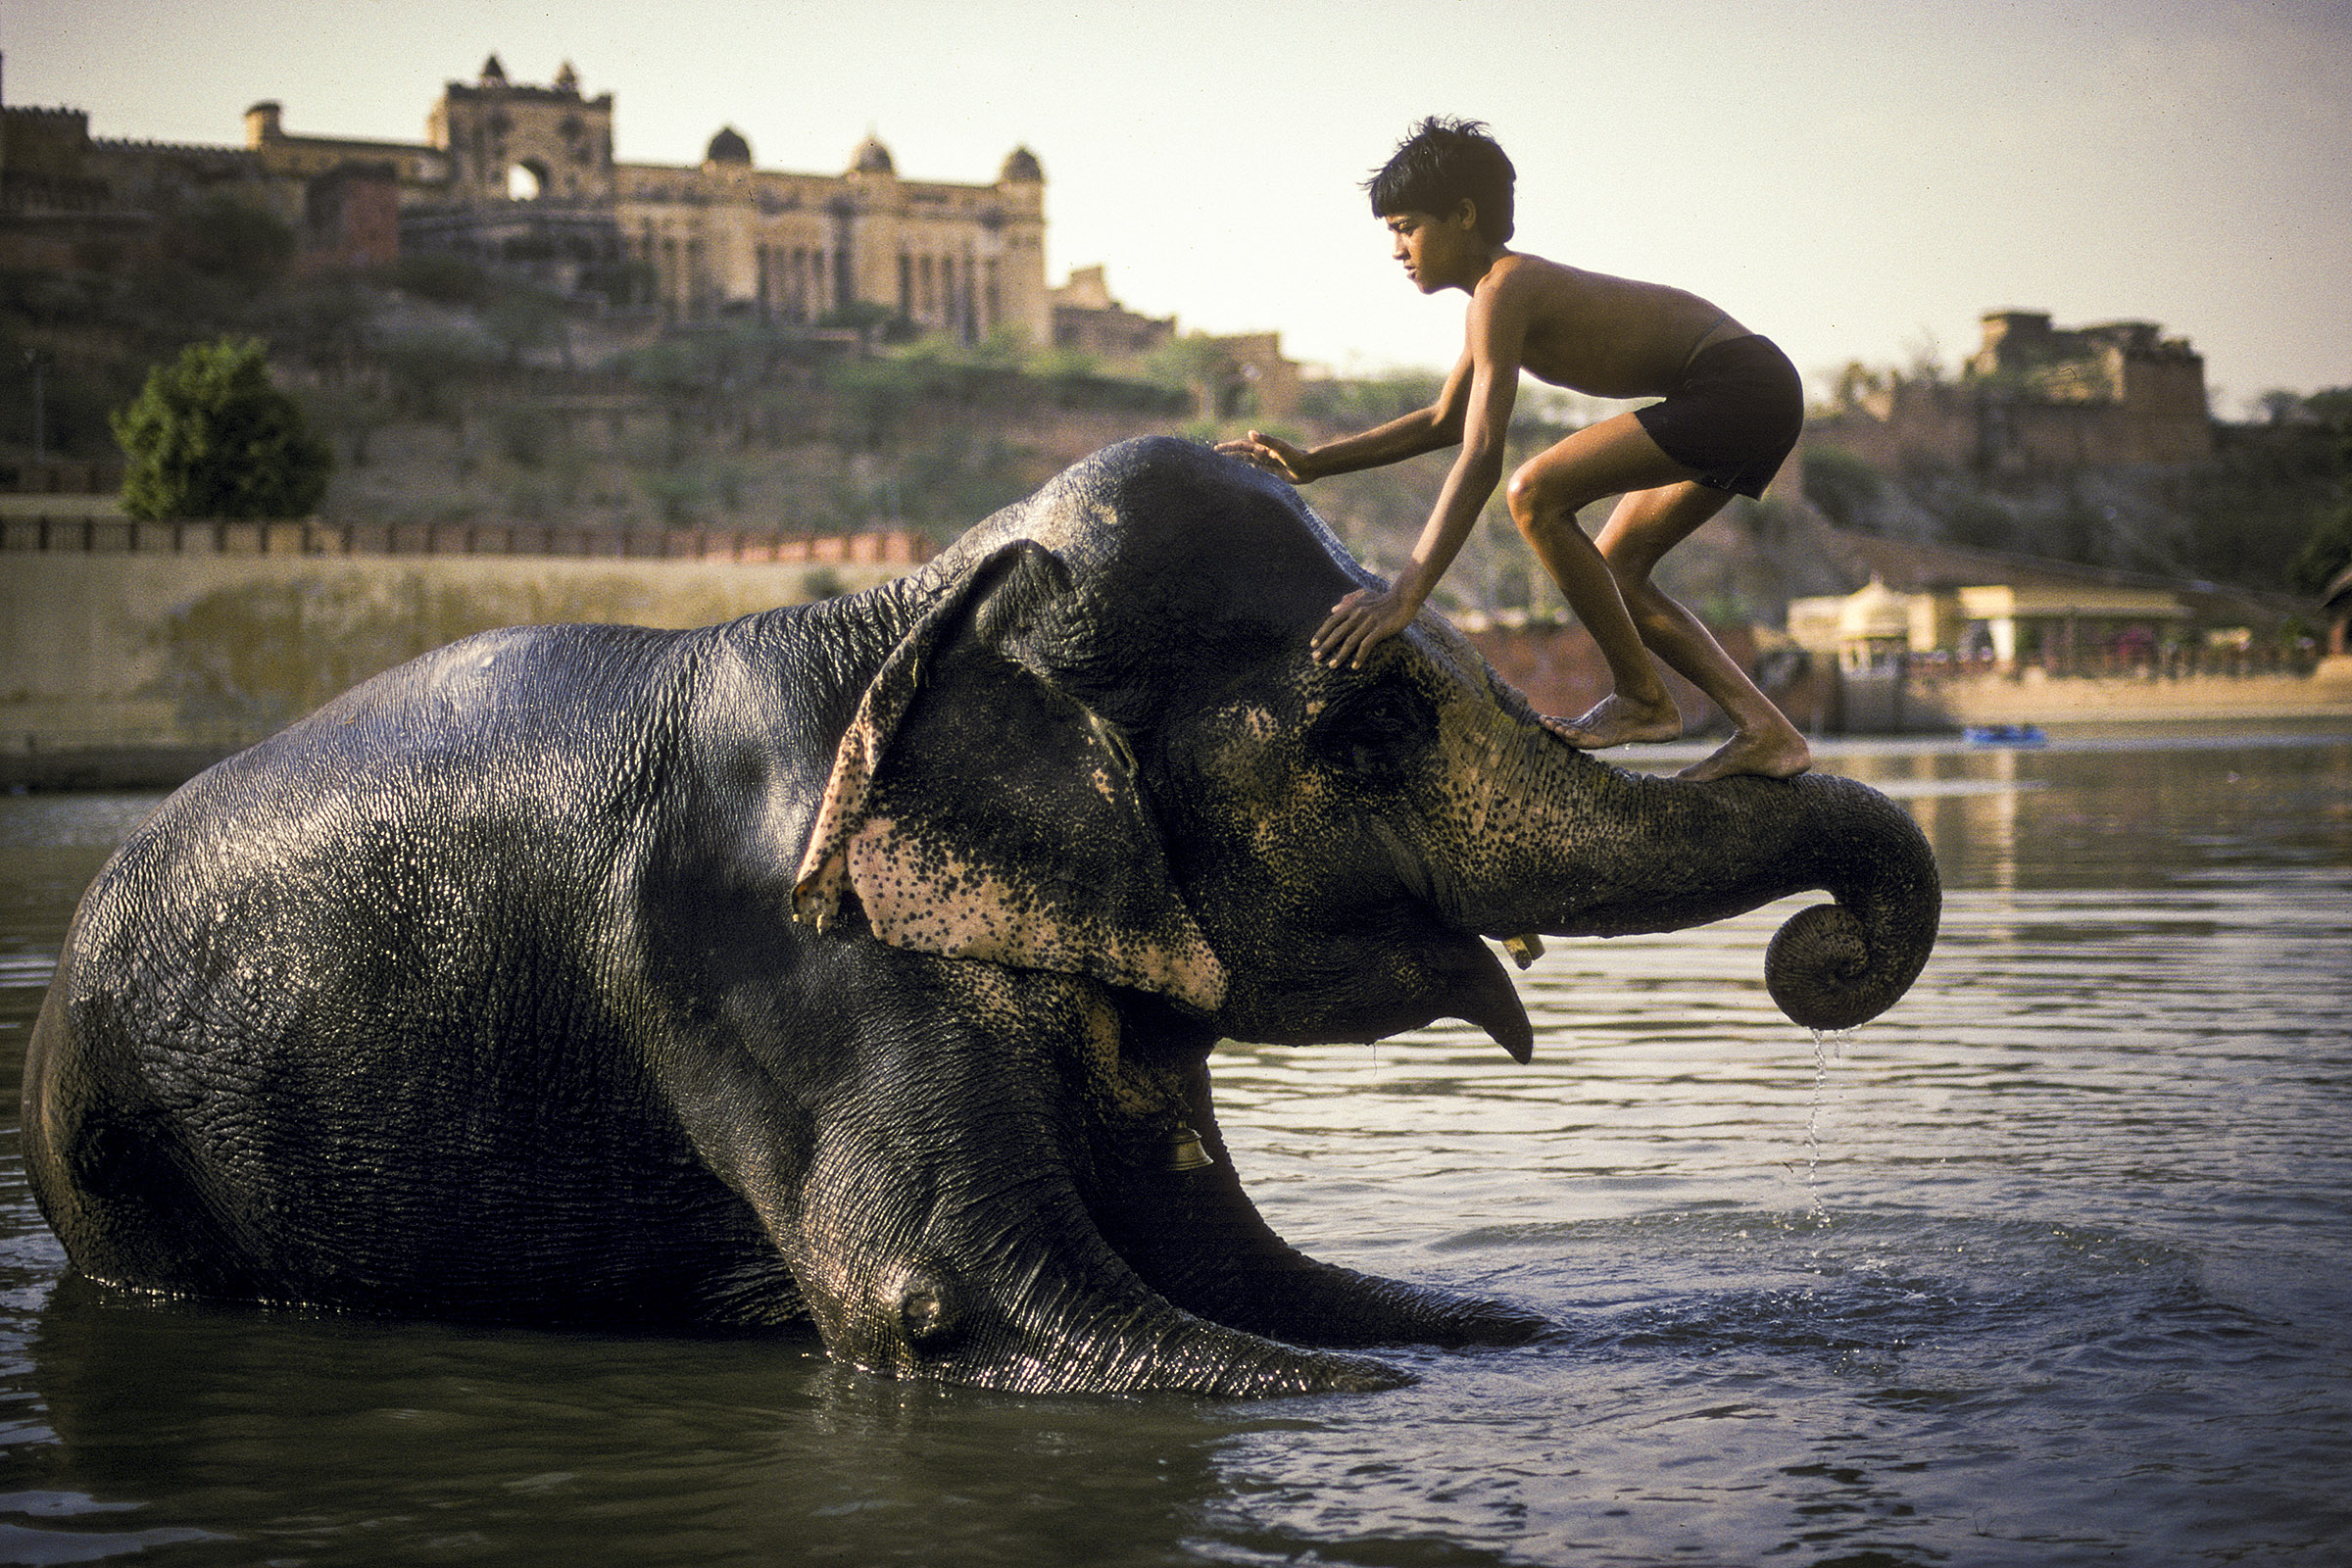 A mahoot tends to his elephant at dusk in the shadow of the Amber Fort, Rajasthan